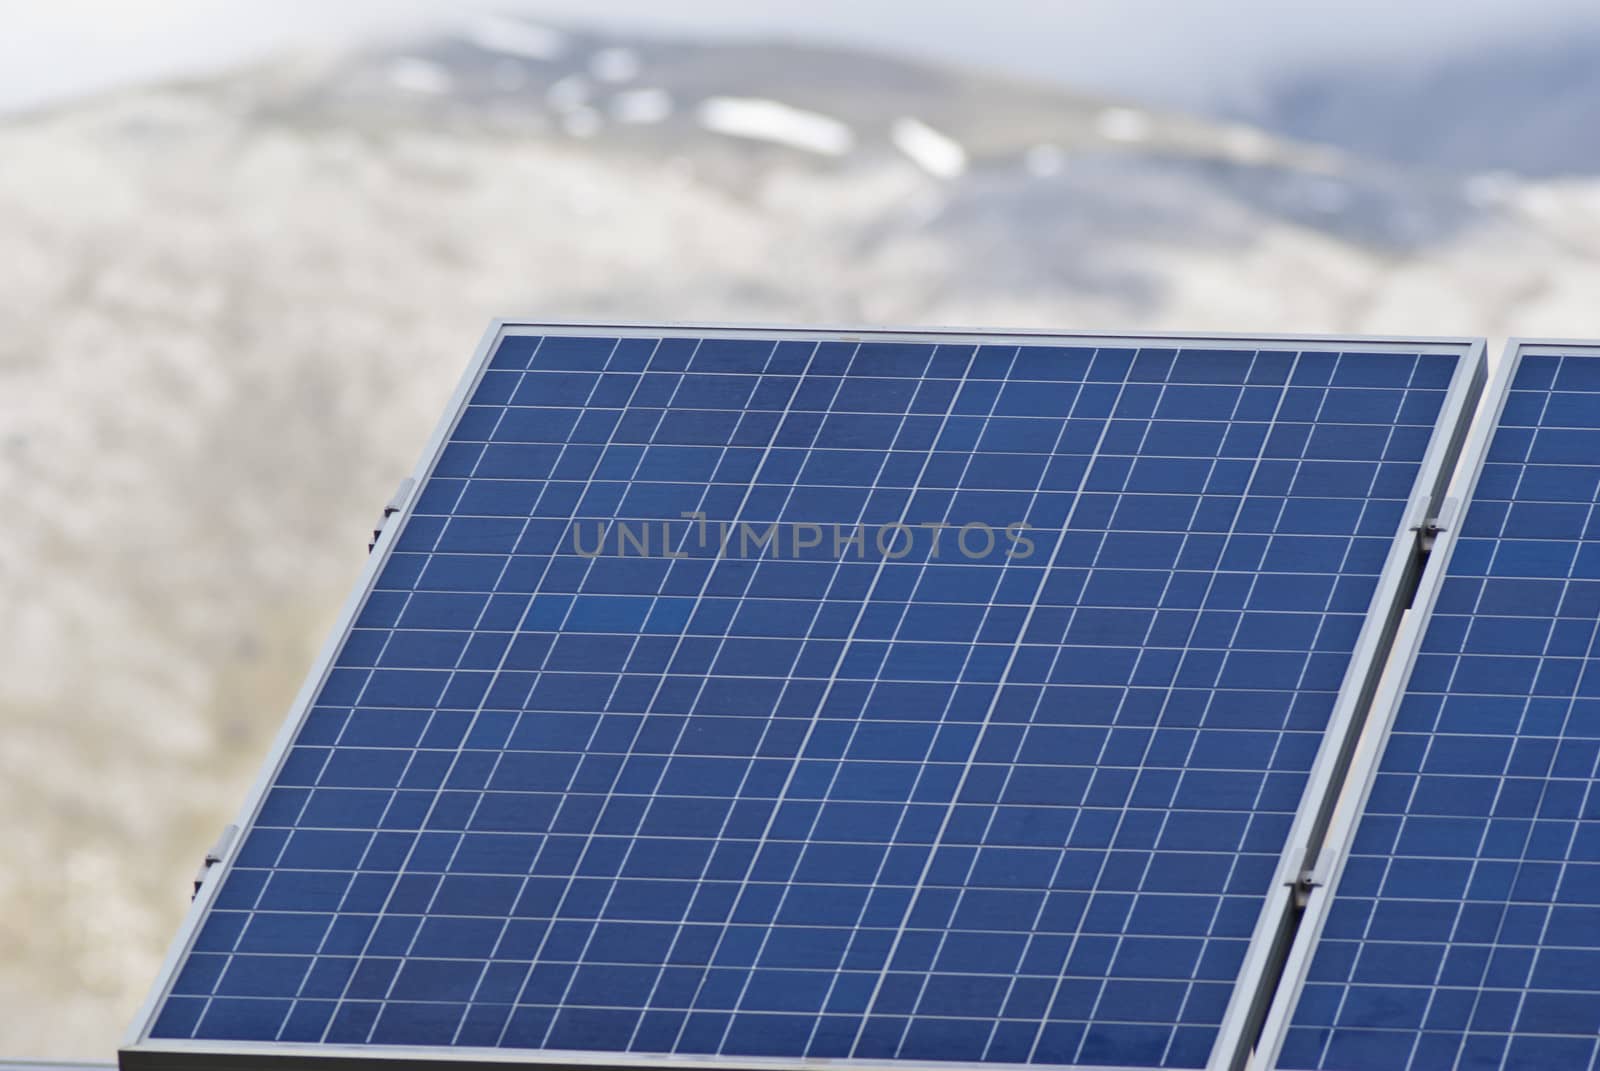 Detail  of solar panels in the Madonie mountains. Sicily